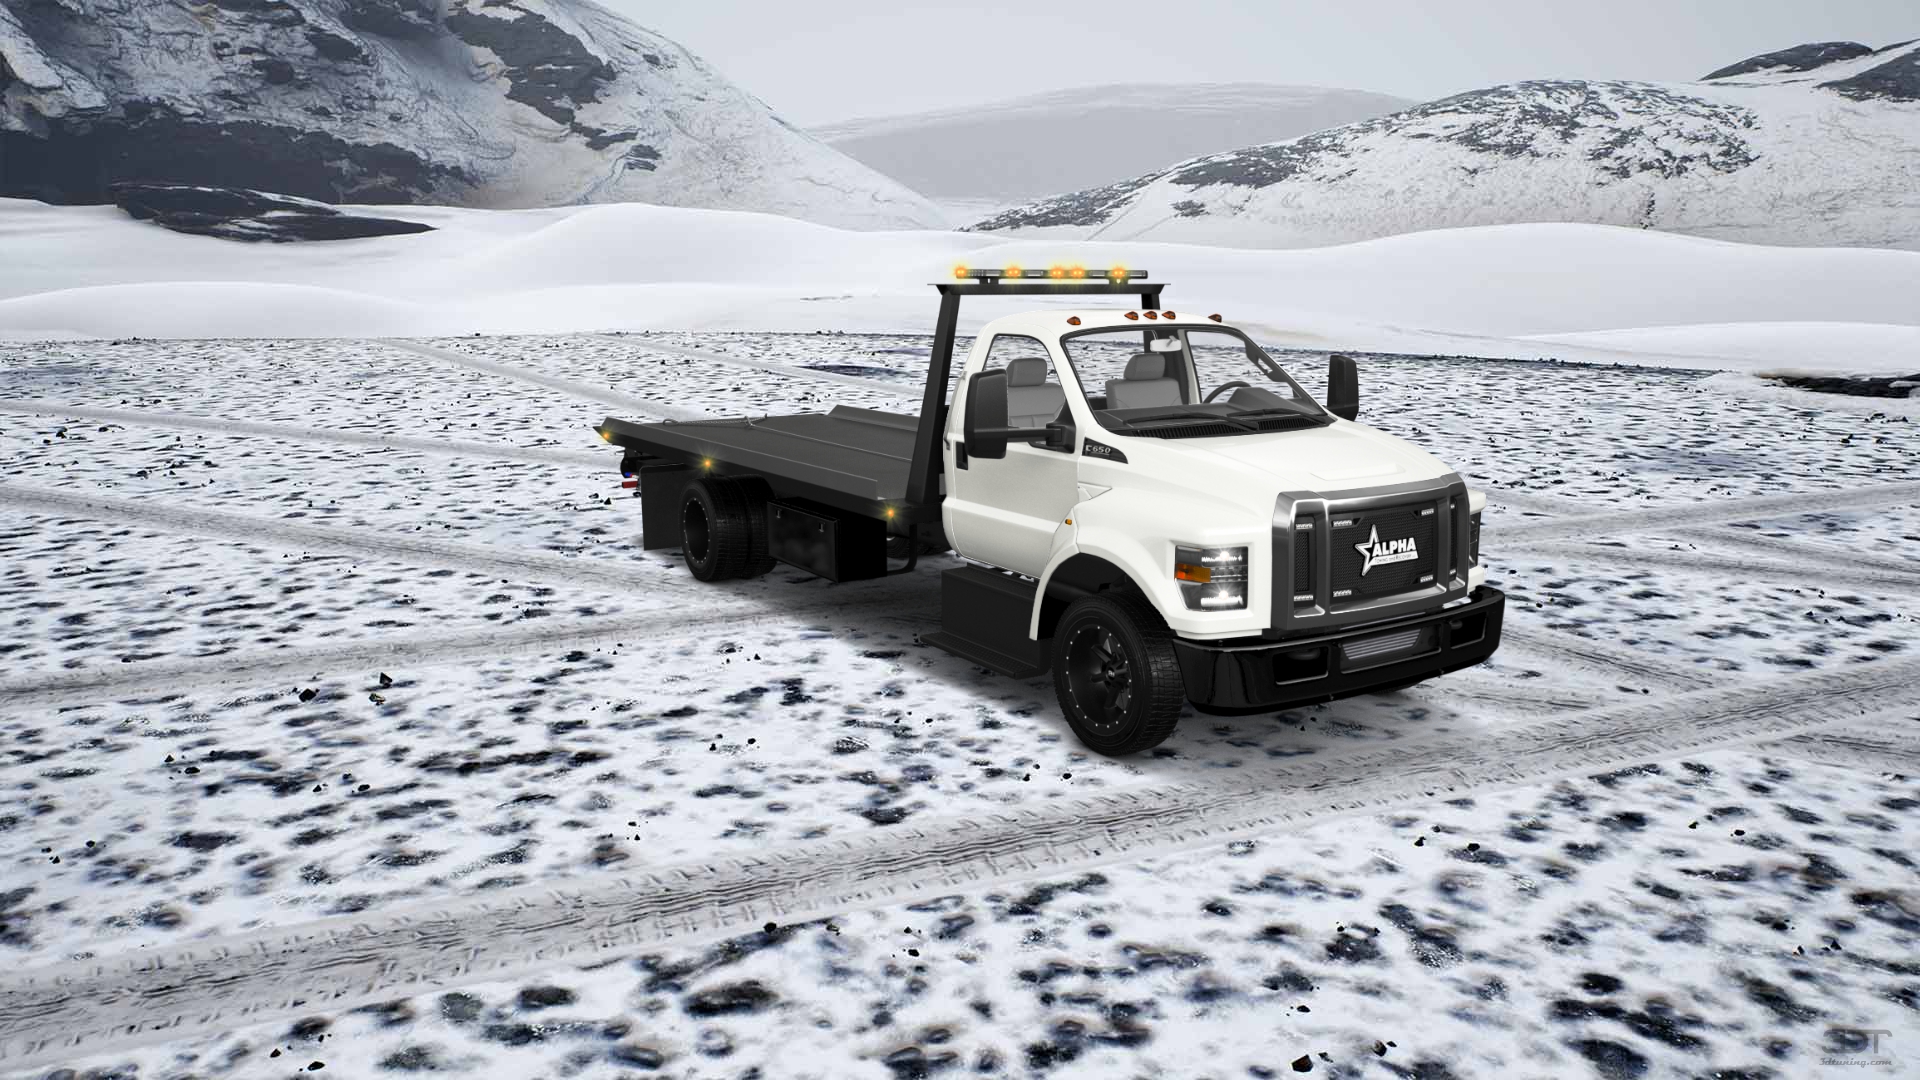 Ford F-650 Tow Truck Pickup 2016